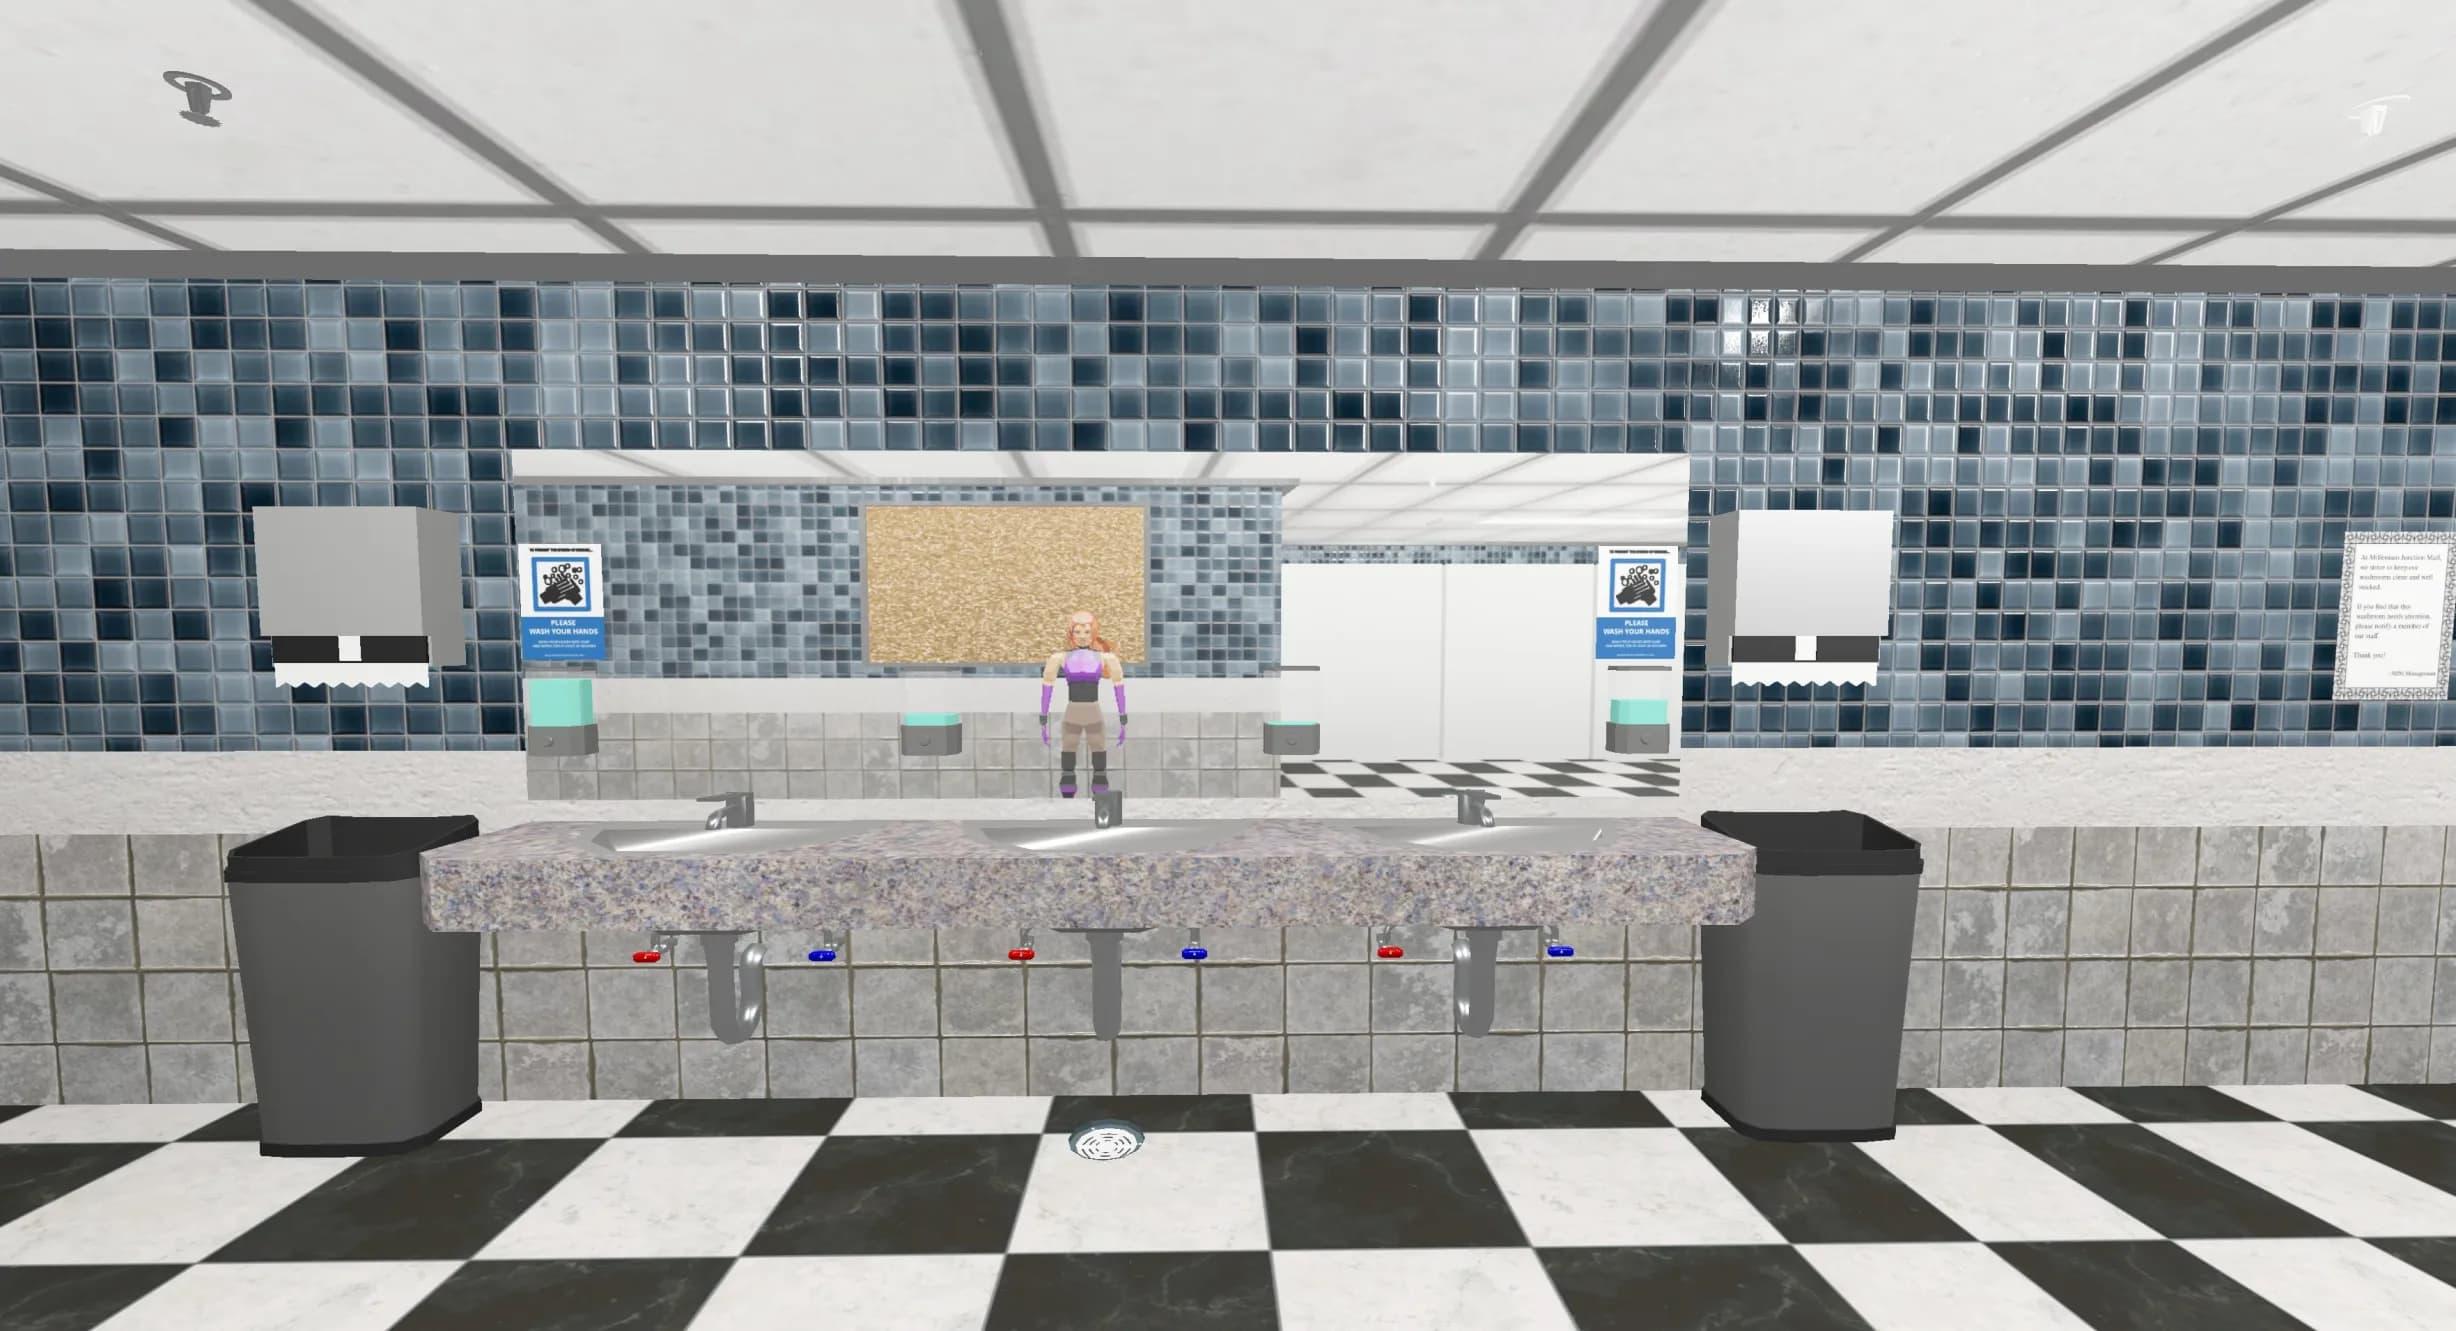 A 3D render of three bathroom sinks underneath a mirror, with paper towel dispensers and garbage cans on either side of the sink counter. In the mirror, an orange-haired female character with a purple shirt is standing in front of a corkboard